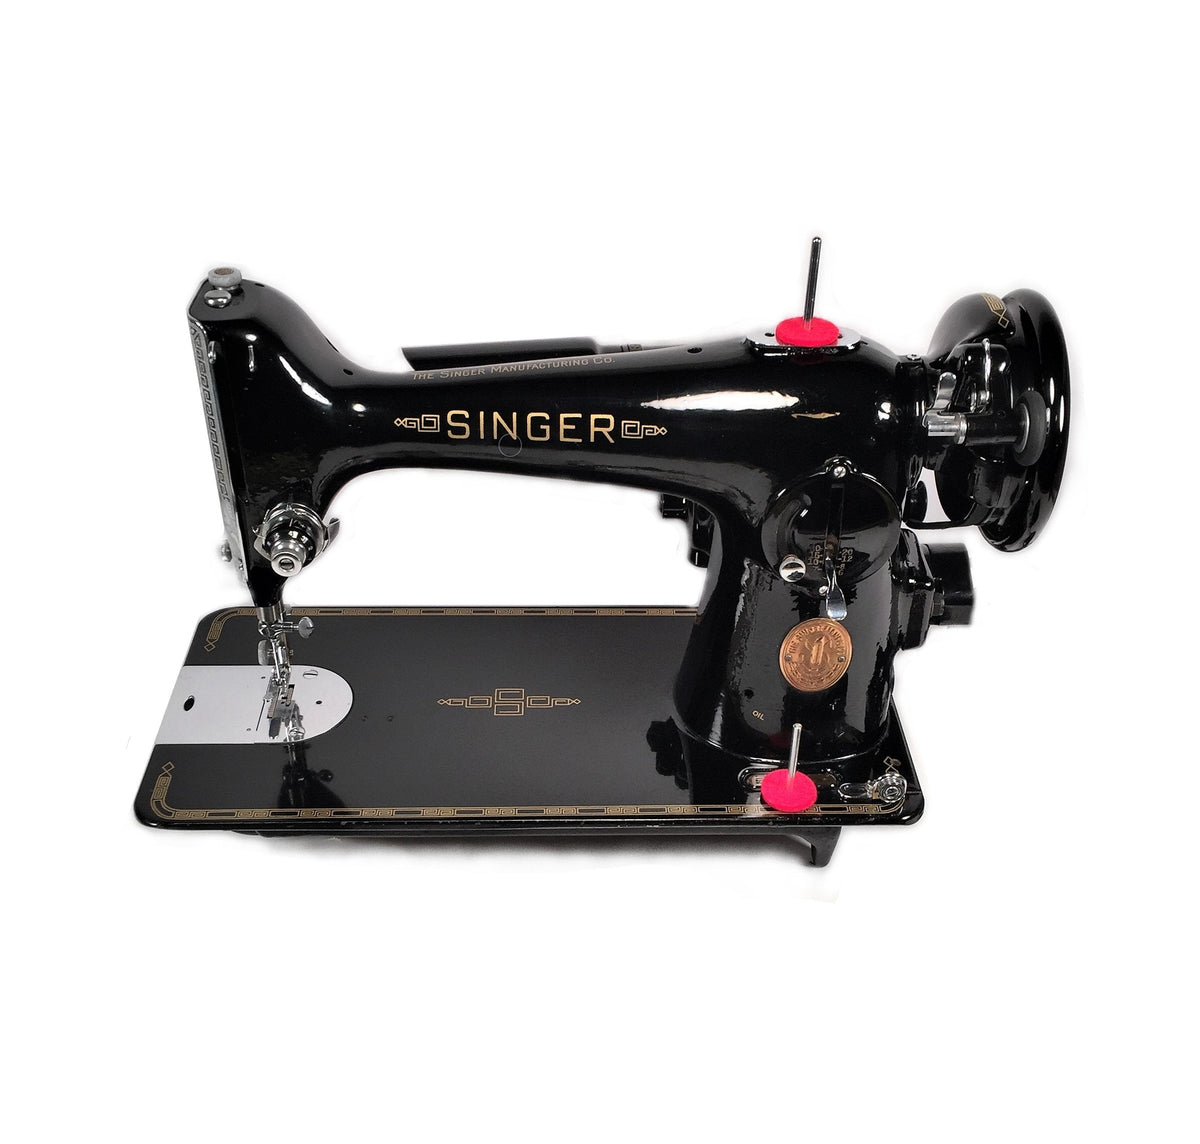 bobbins NEW 3 SINGER 201 SEWING MACHINE PARTS QUILTERS 